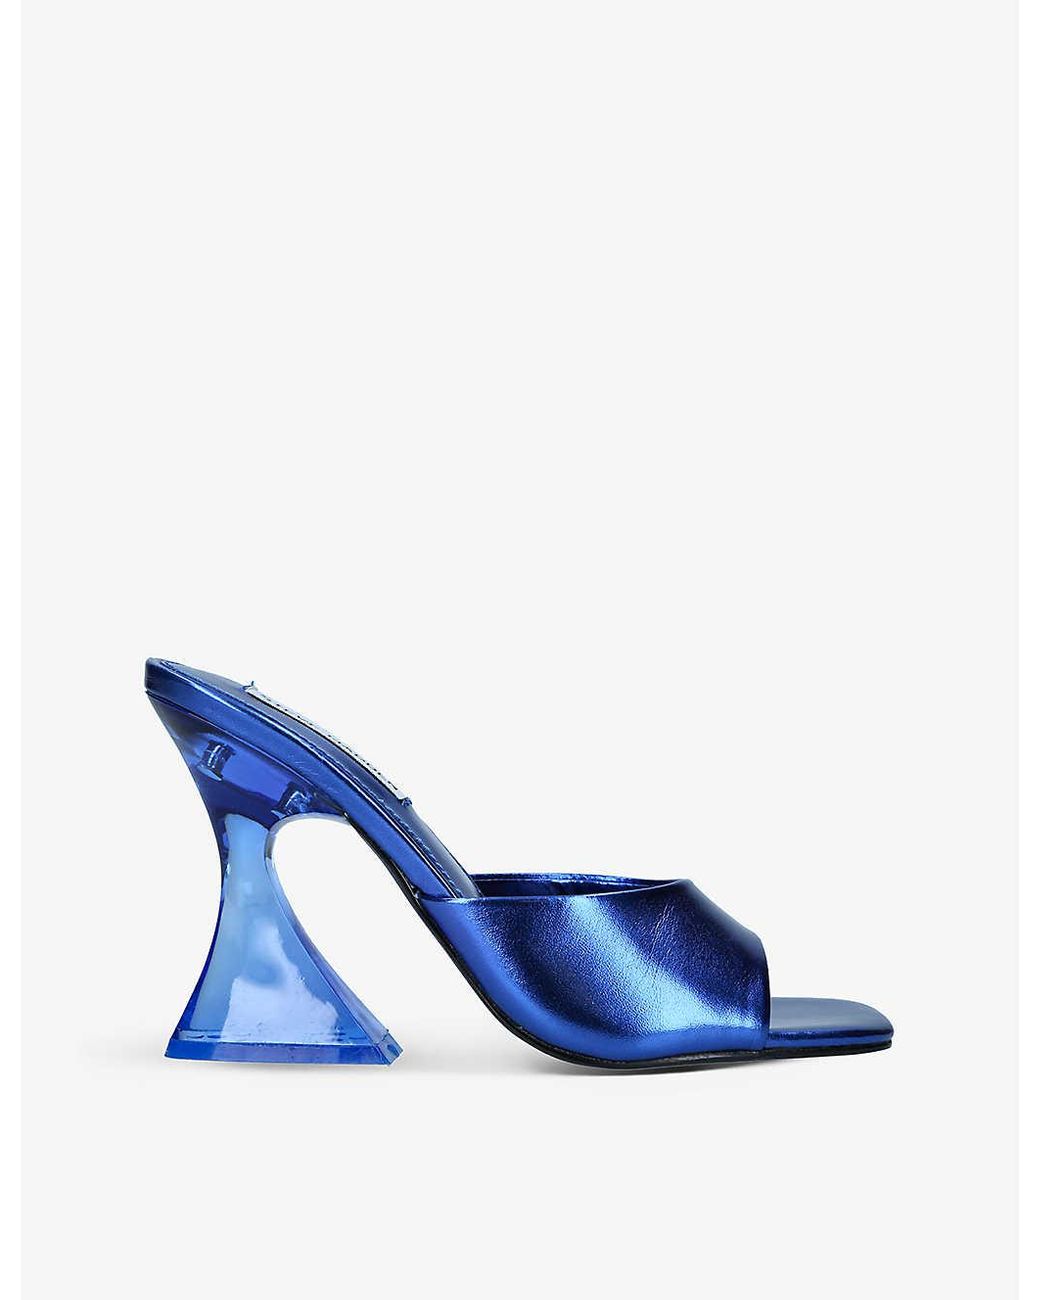 Steve Madden Sky High Heeled Faux-leather Mules in Blue | Lyst